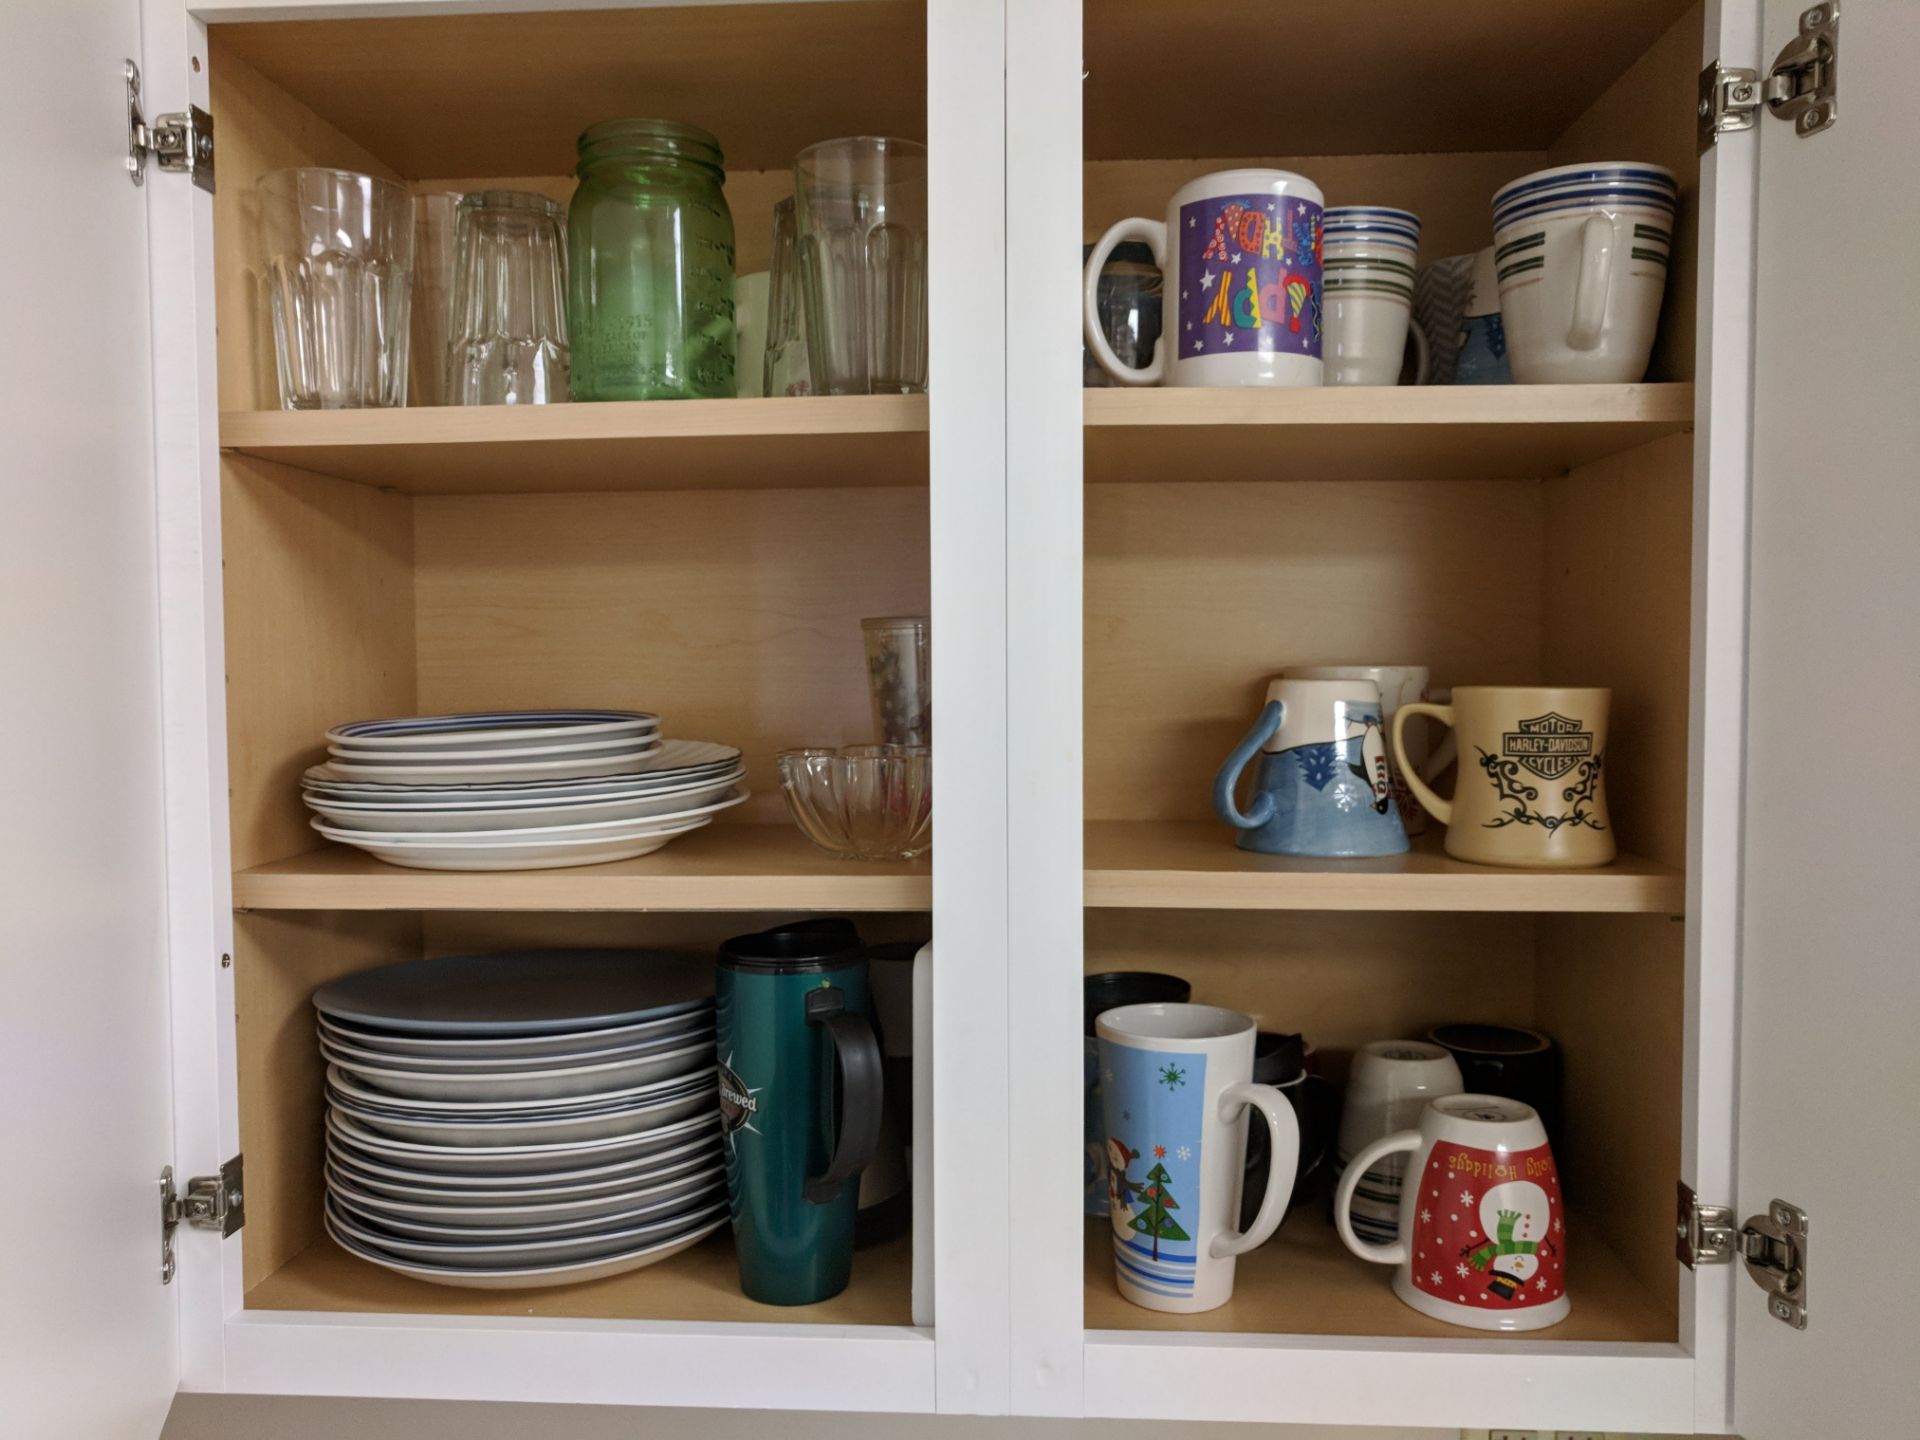 DISHWARE IN CABINETS